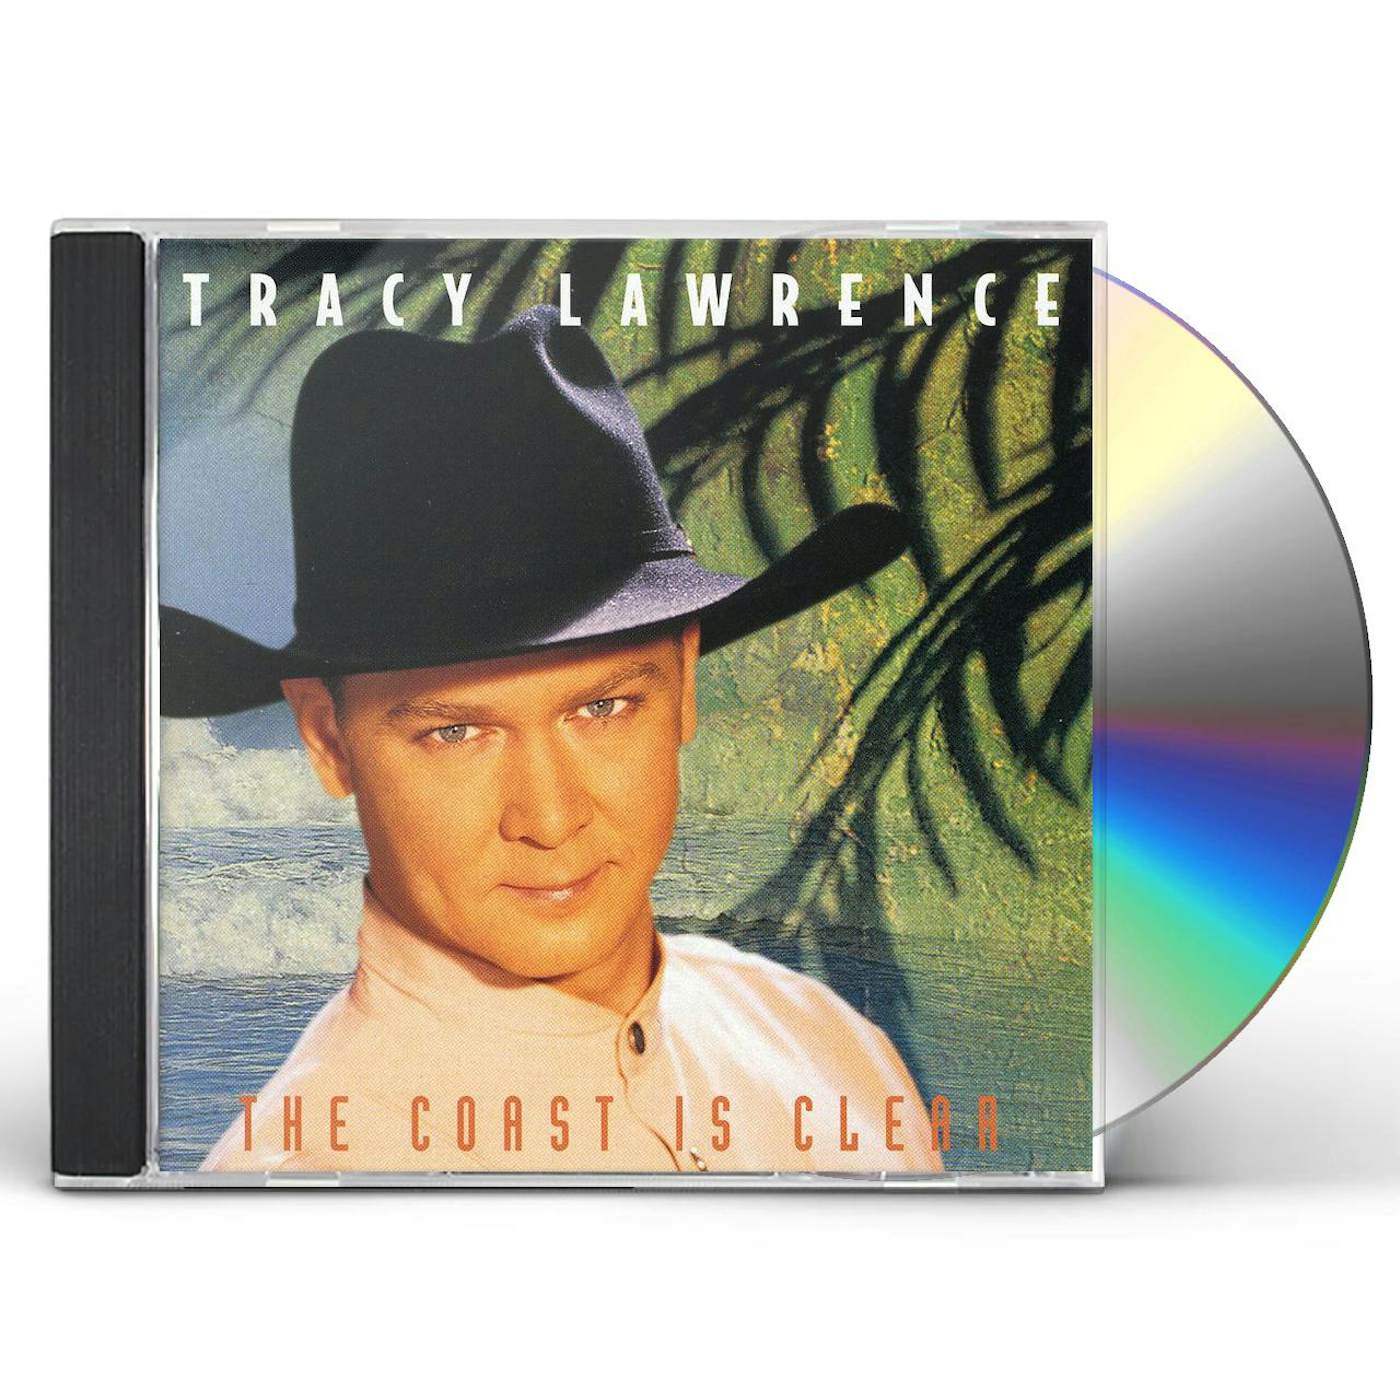 Tracy Lawrence COAST IS CLEAR CD